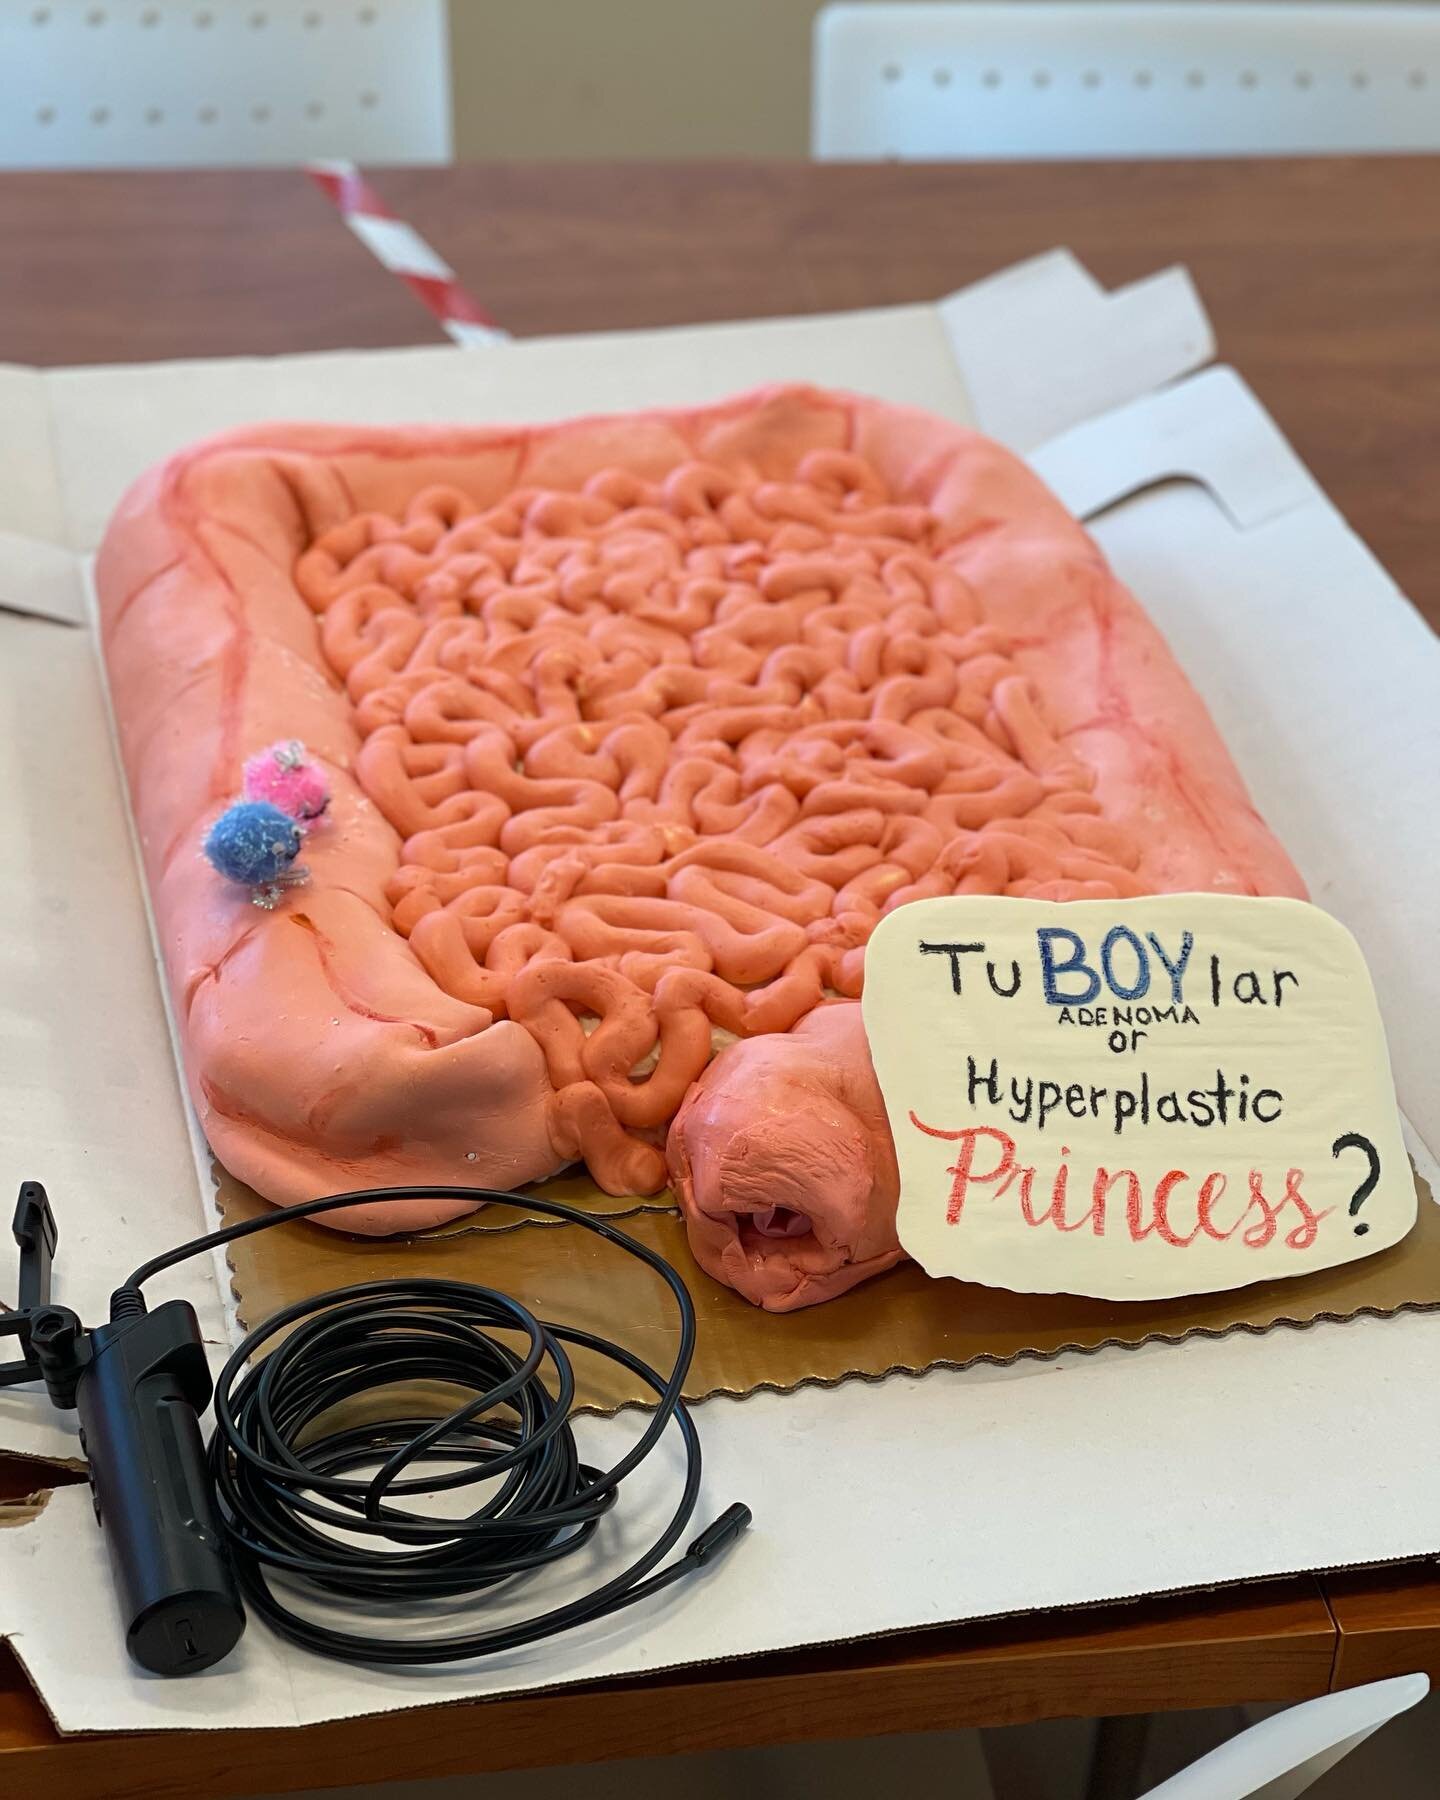 What&rsquo;s a GI party without a colon cake?! We had a gender reveal party today for one of our NPs - swipe to see!

🎂 by Lyndsey ⭐️